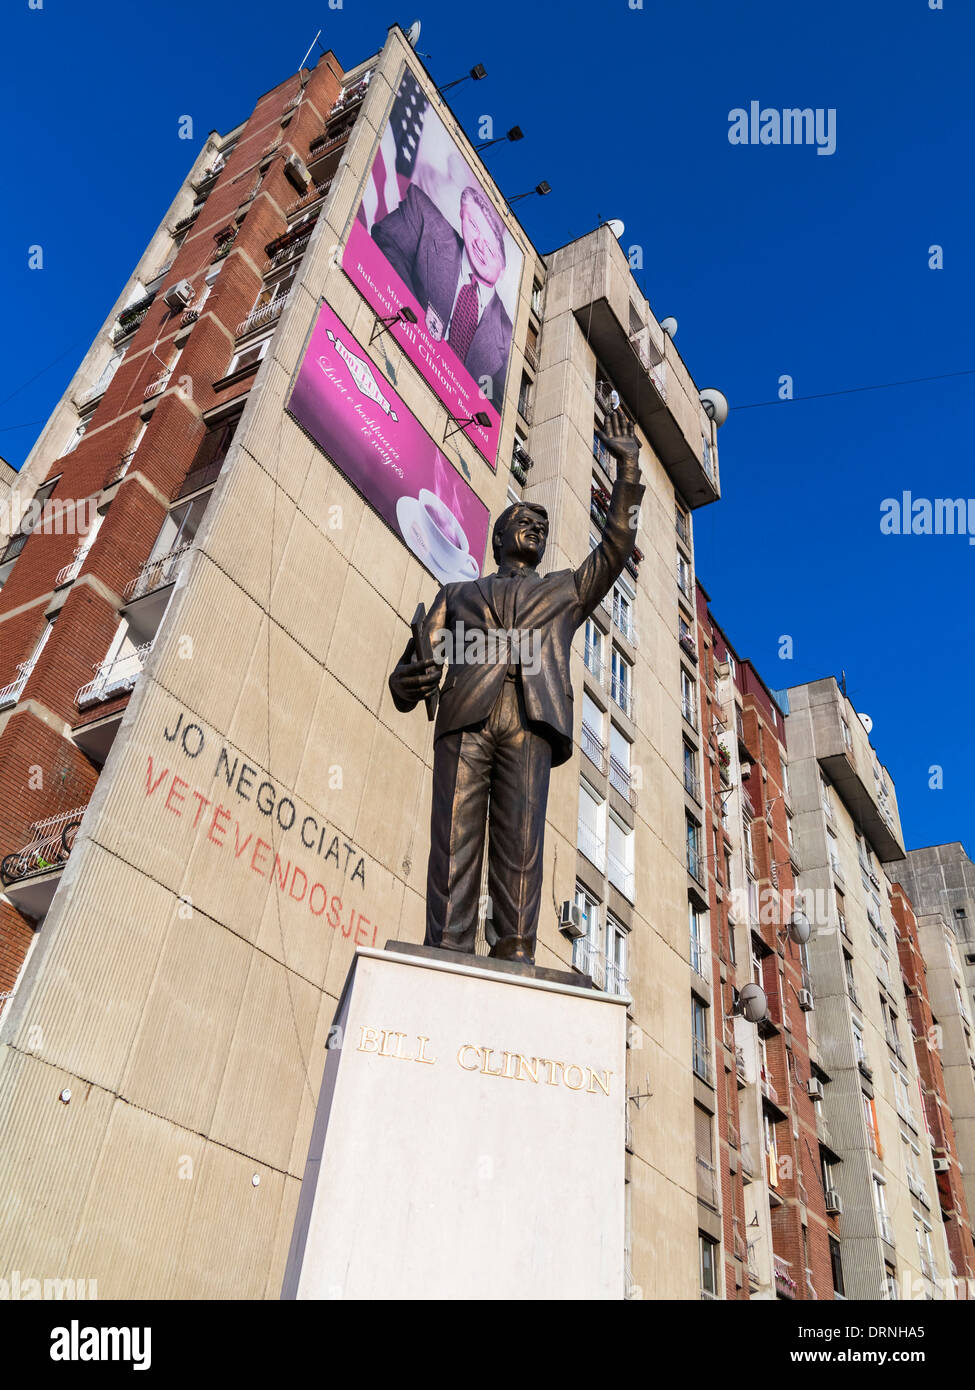 Bill Clinton's statue and billboard, Pristina, Kosovo, Europe. He holds the 1999 agreement to allow US troops to enter Kosovo Stock Photo